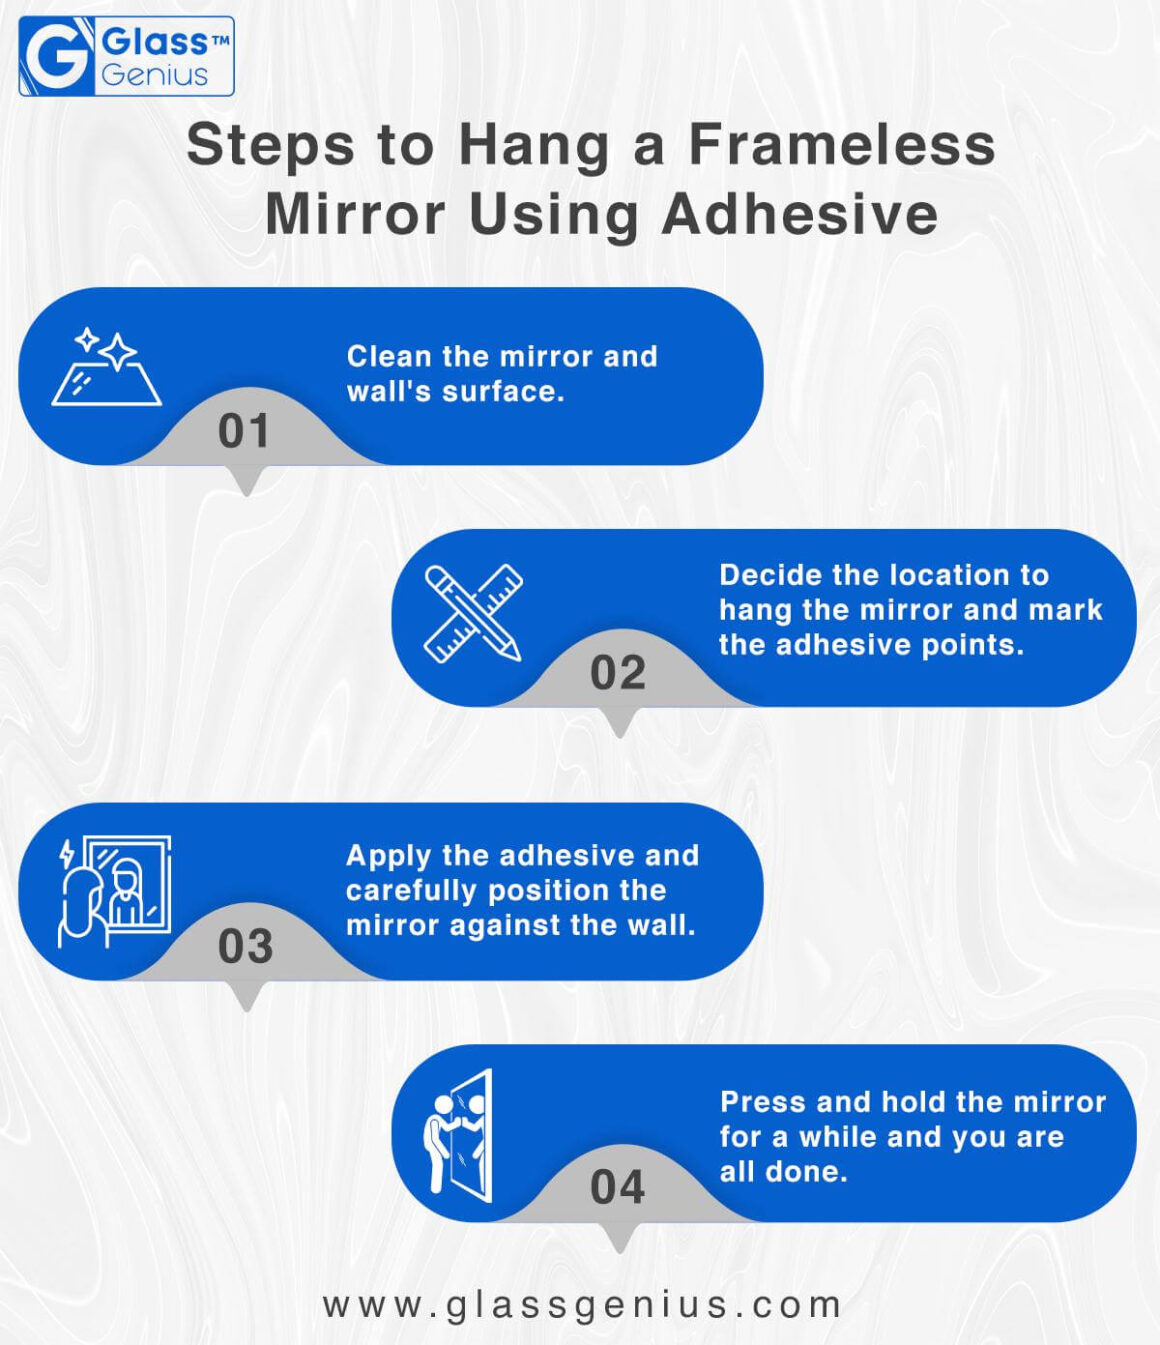 Steps to Hang a Frameless Mirror Using Adhesive